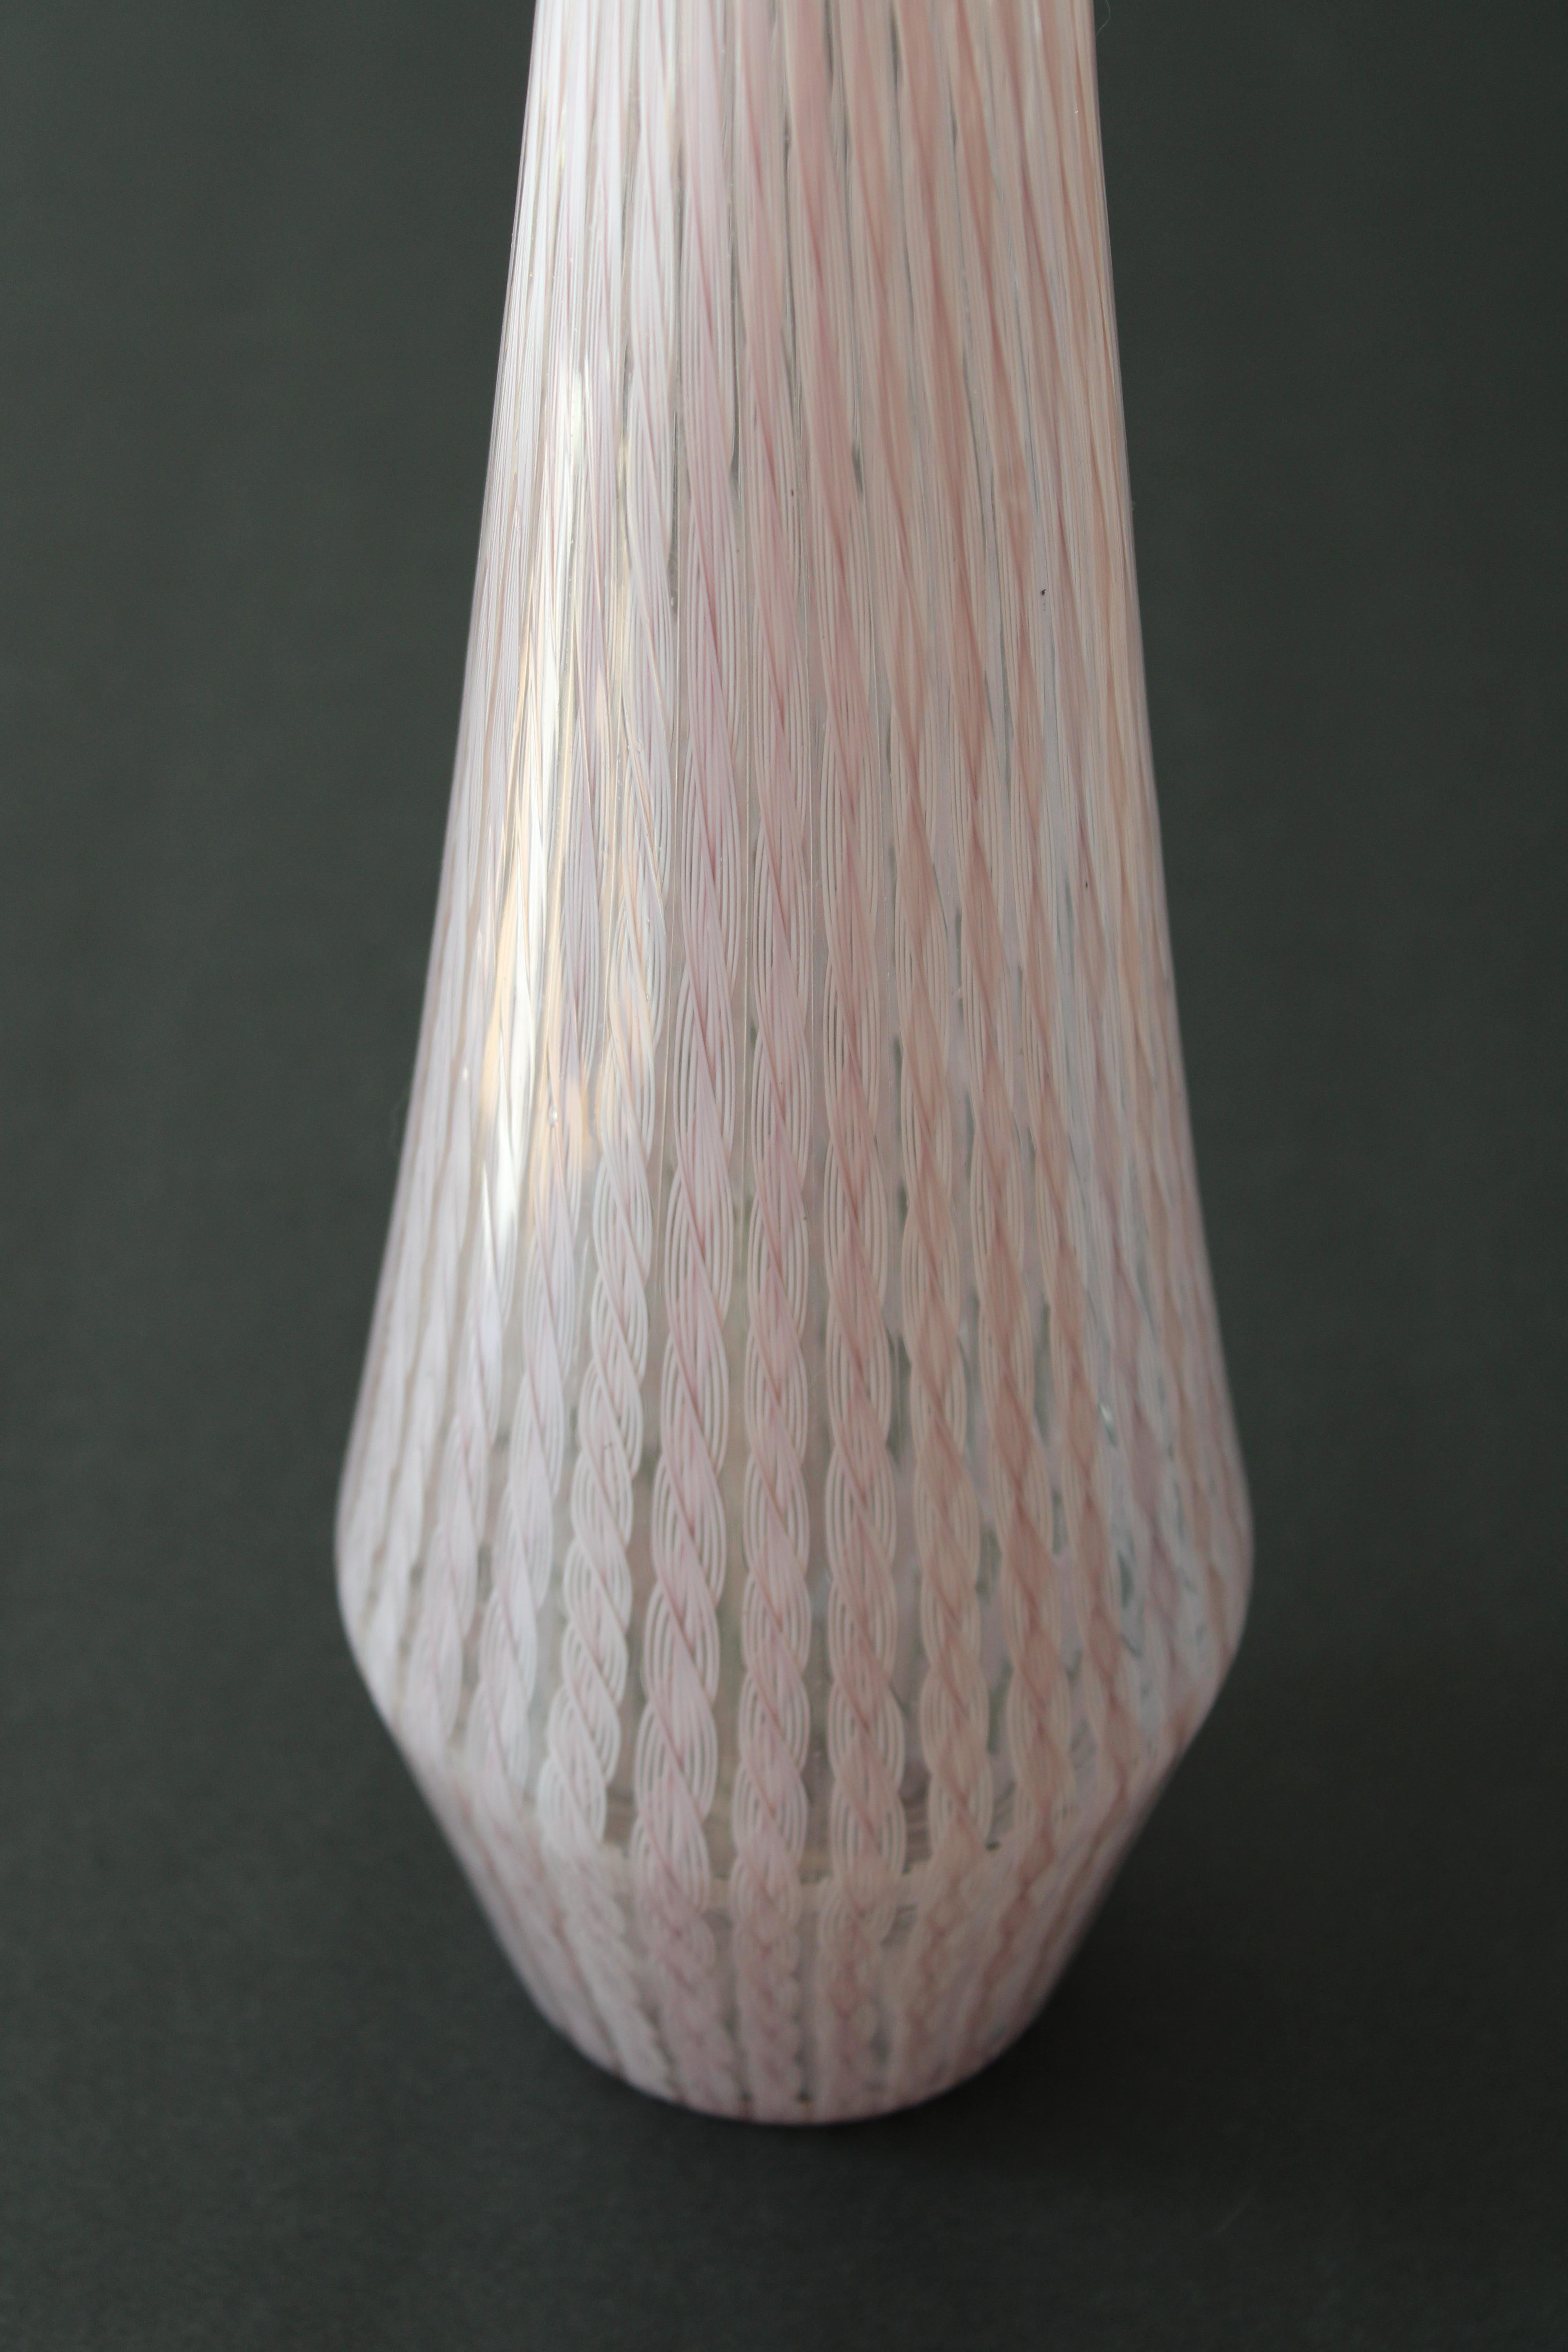 Murano vase with a violet and white criss cross pattern.  Vase contains label that says Murano Glass Made in Italy.  Vase measures 15